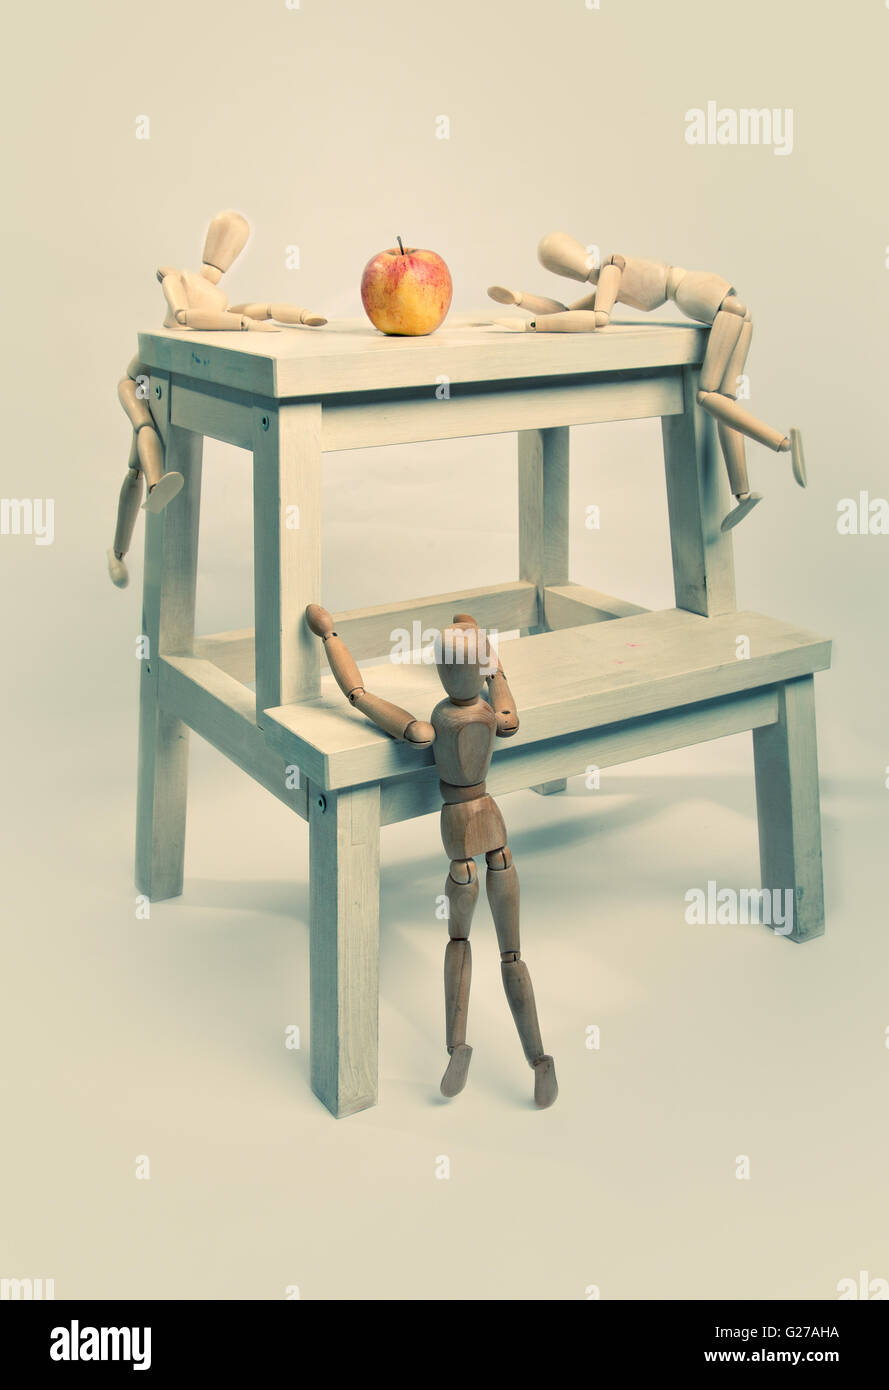 Three jointed dolls try to get to the apple first Stock Photo